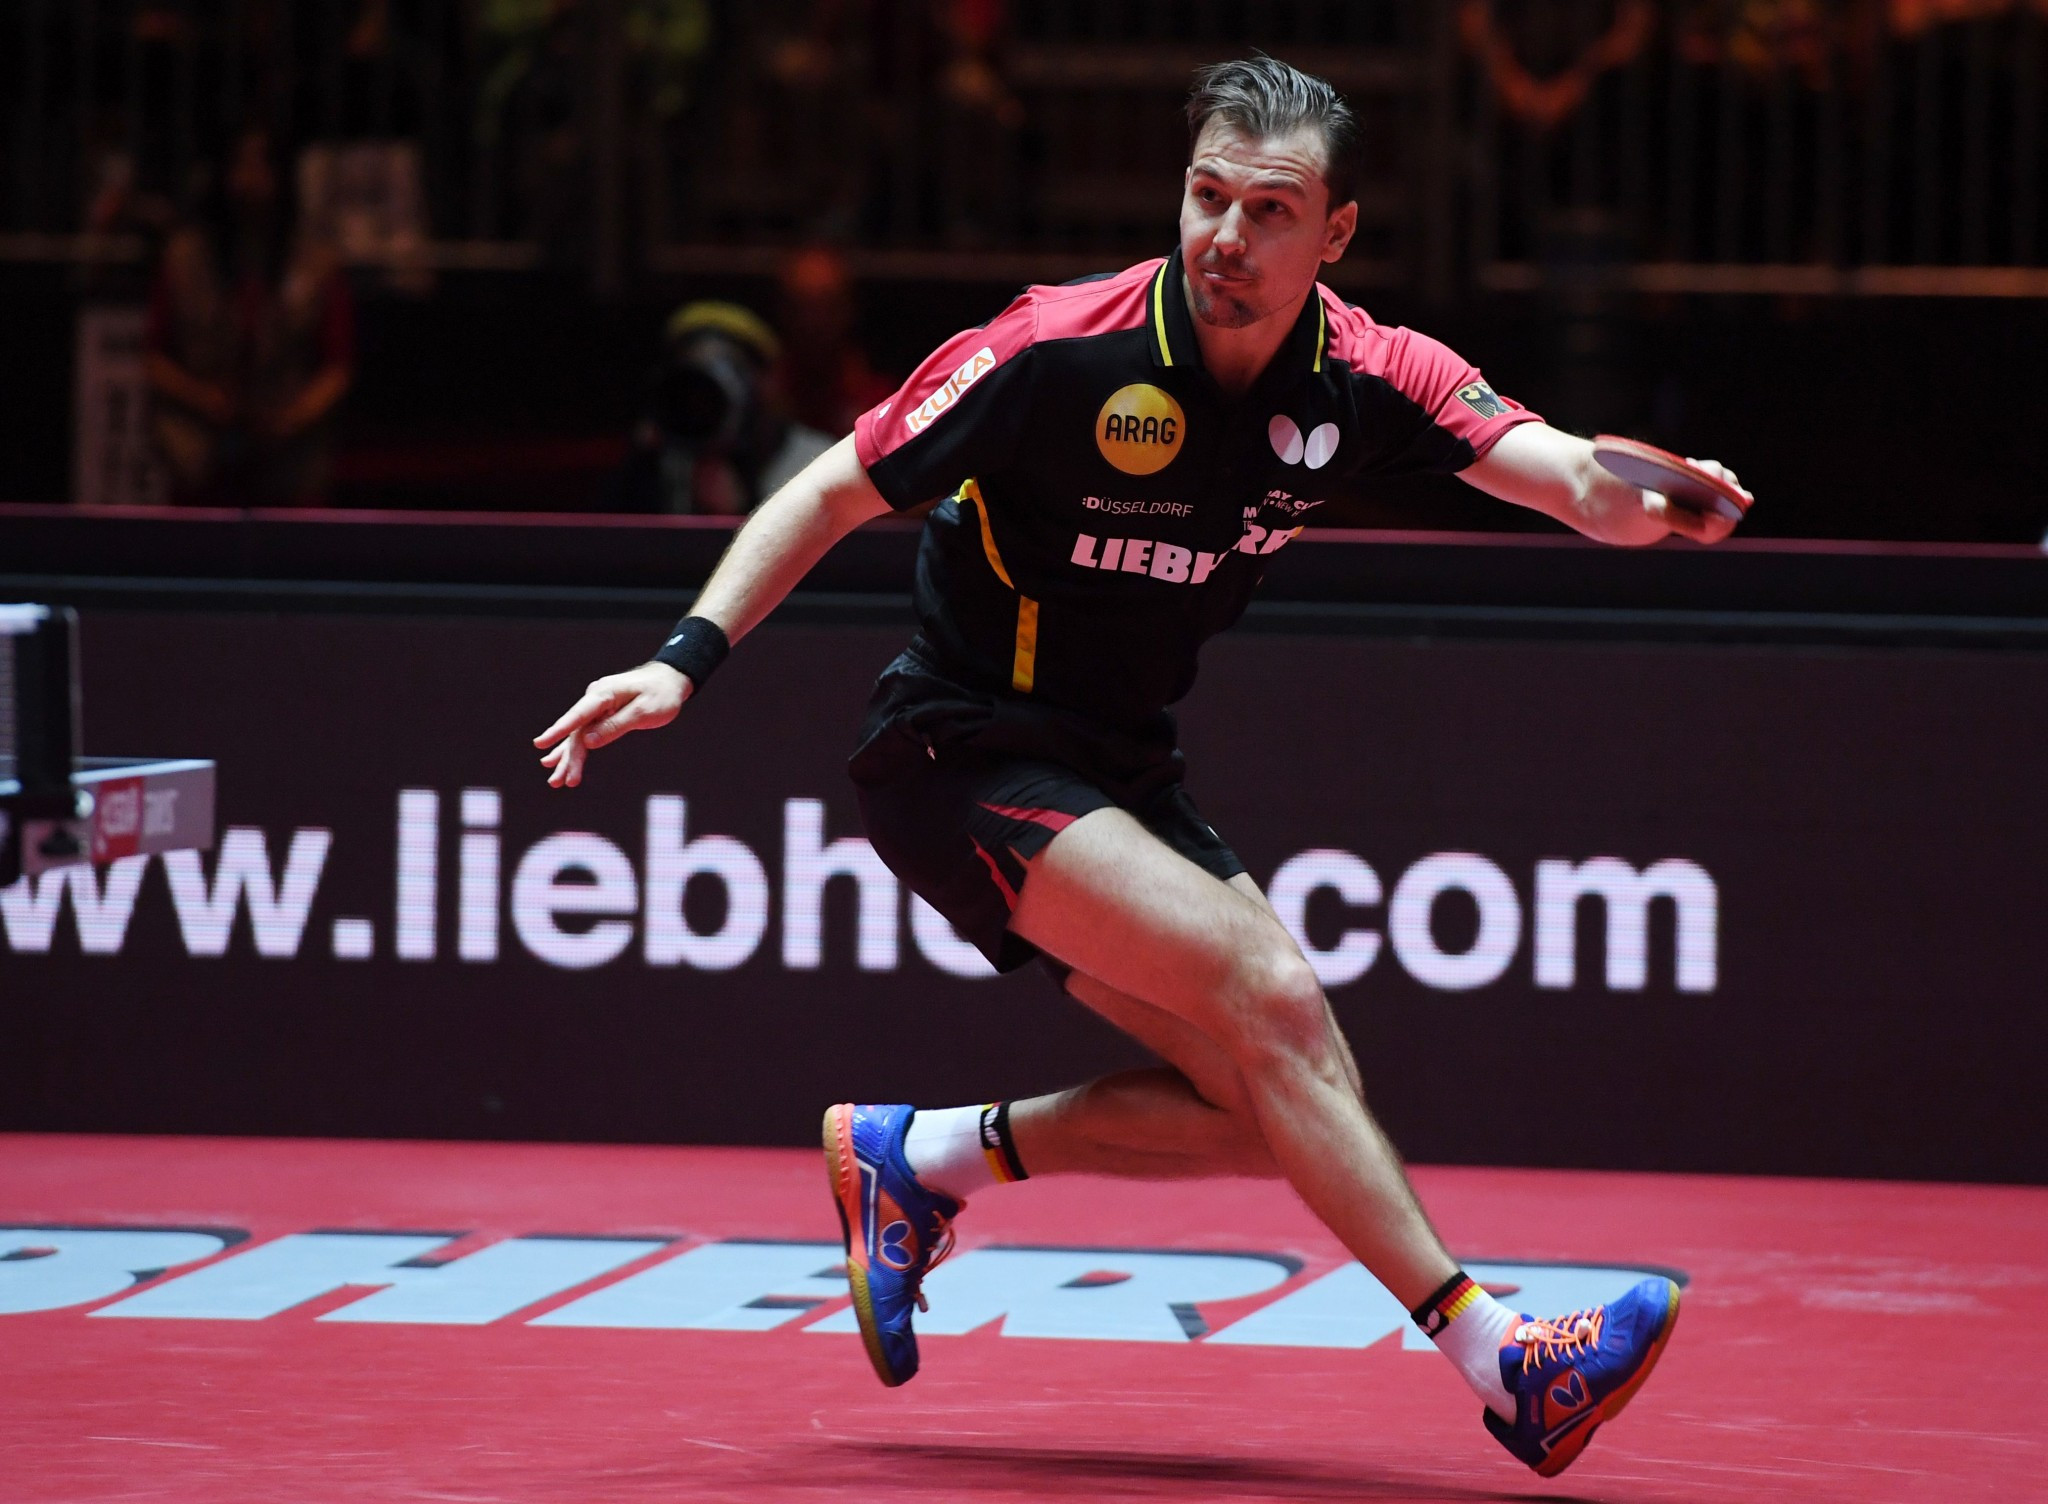 Timo Boll battled back to reach the last eight in the Czech Republic ©Getty Images